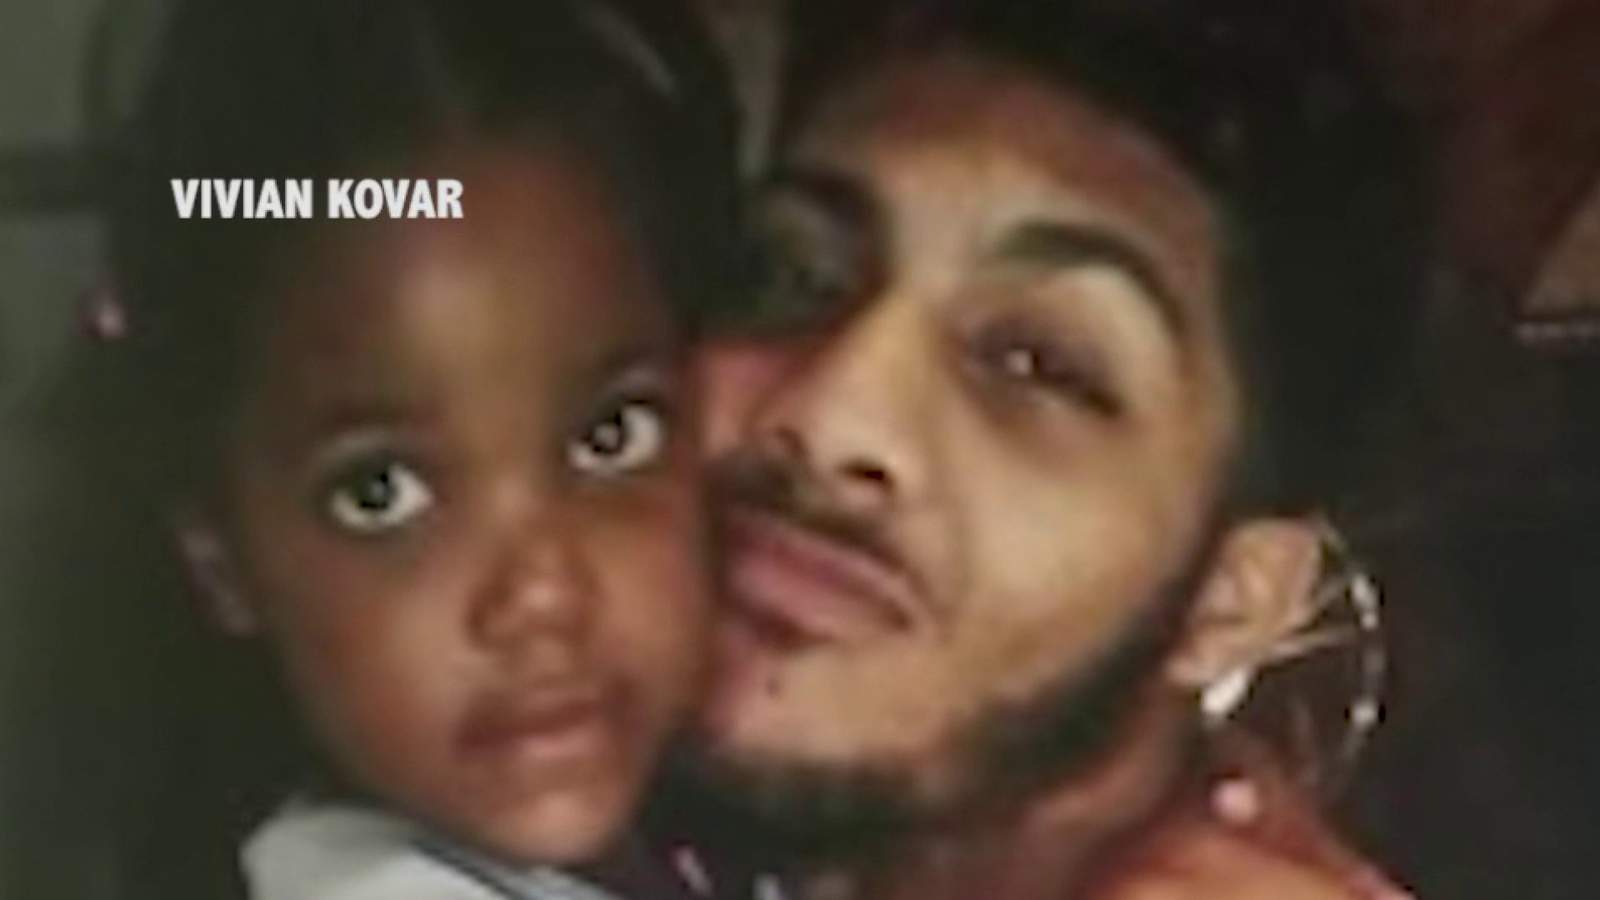 Family pleading for justice, closure after their loved one was fatally shot nearly one year ago